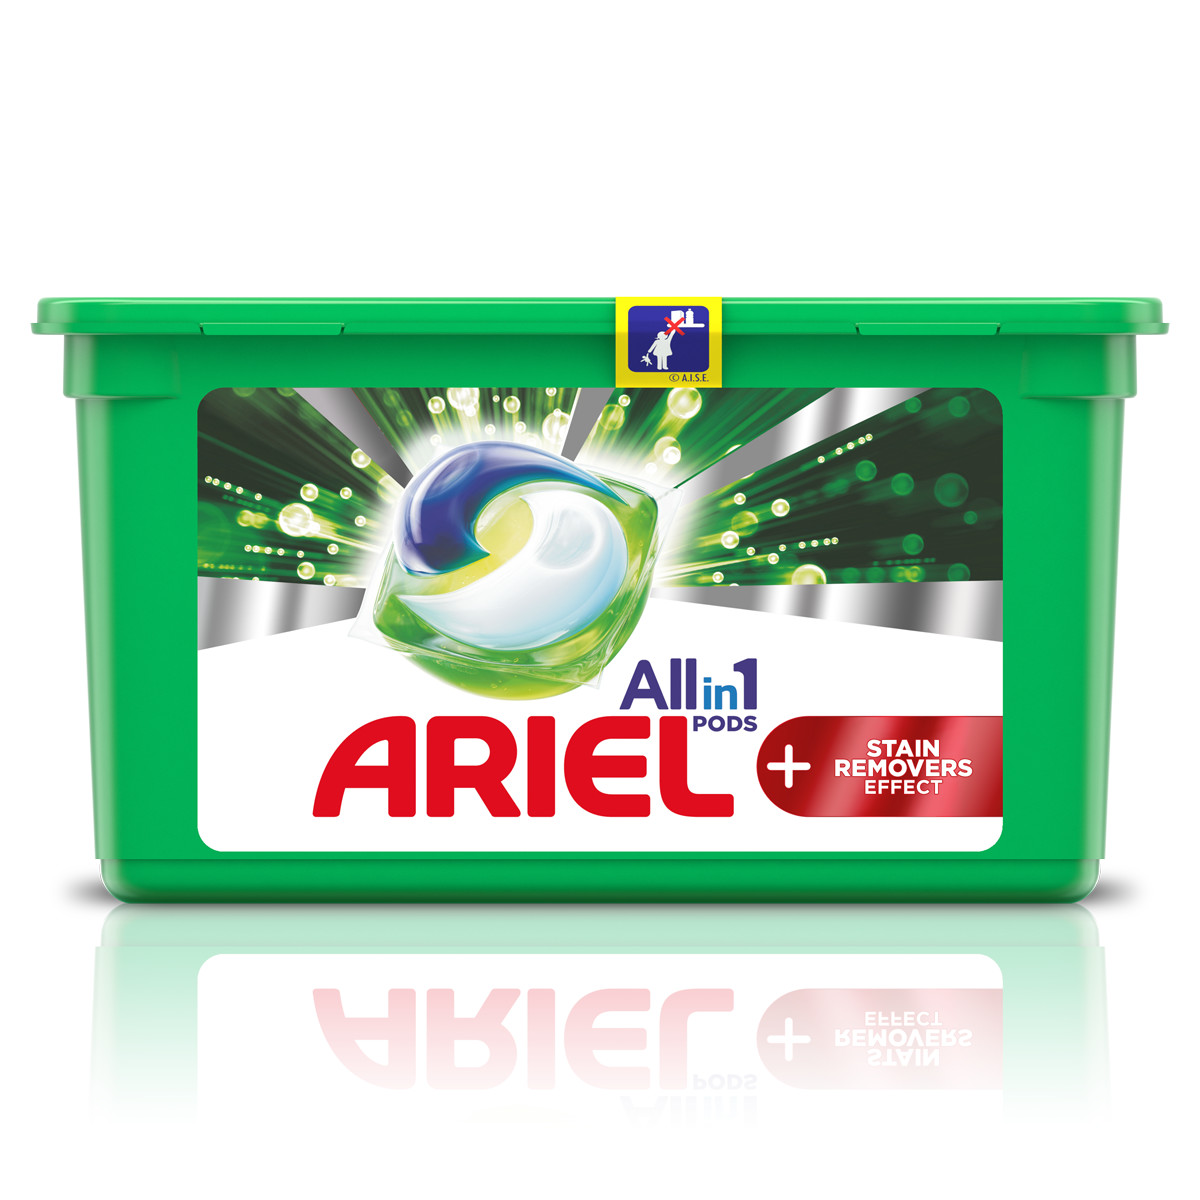 Ariel All-in-1 PODS +Stain Removers Effect